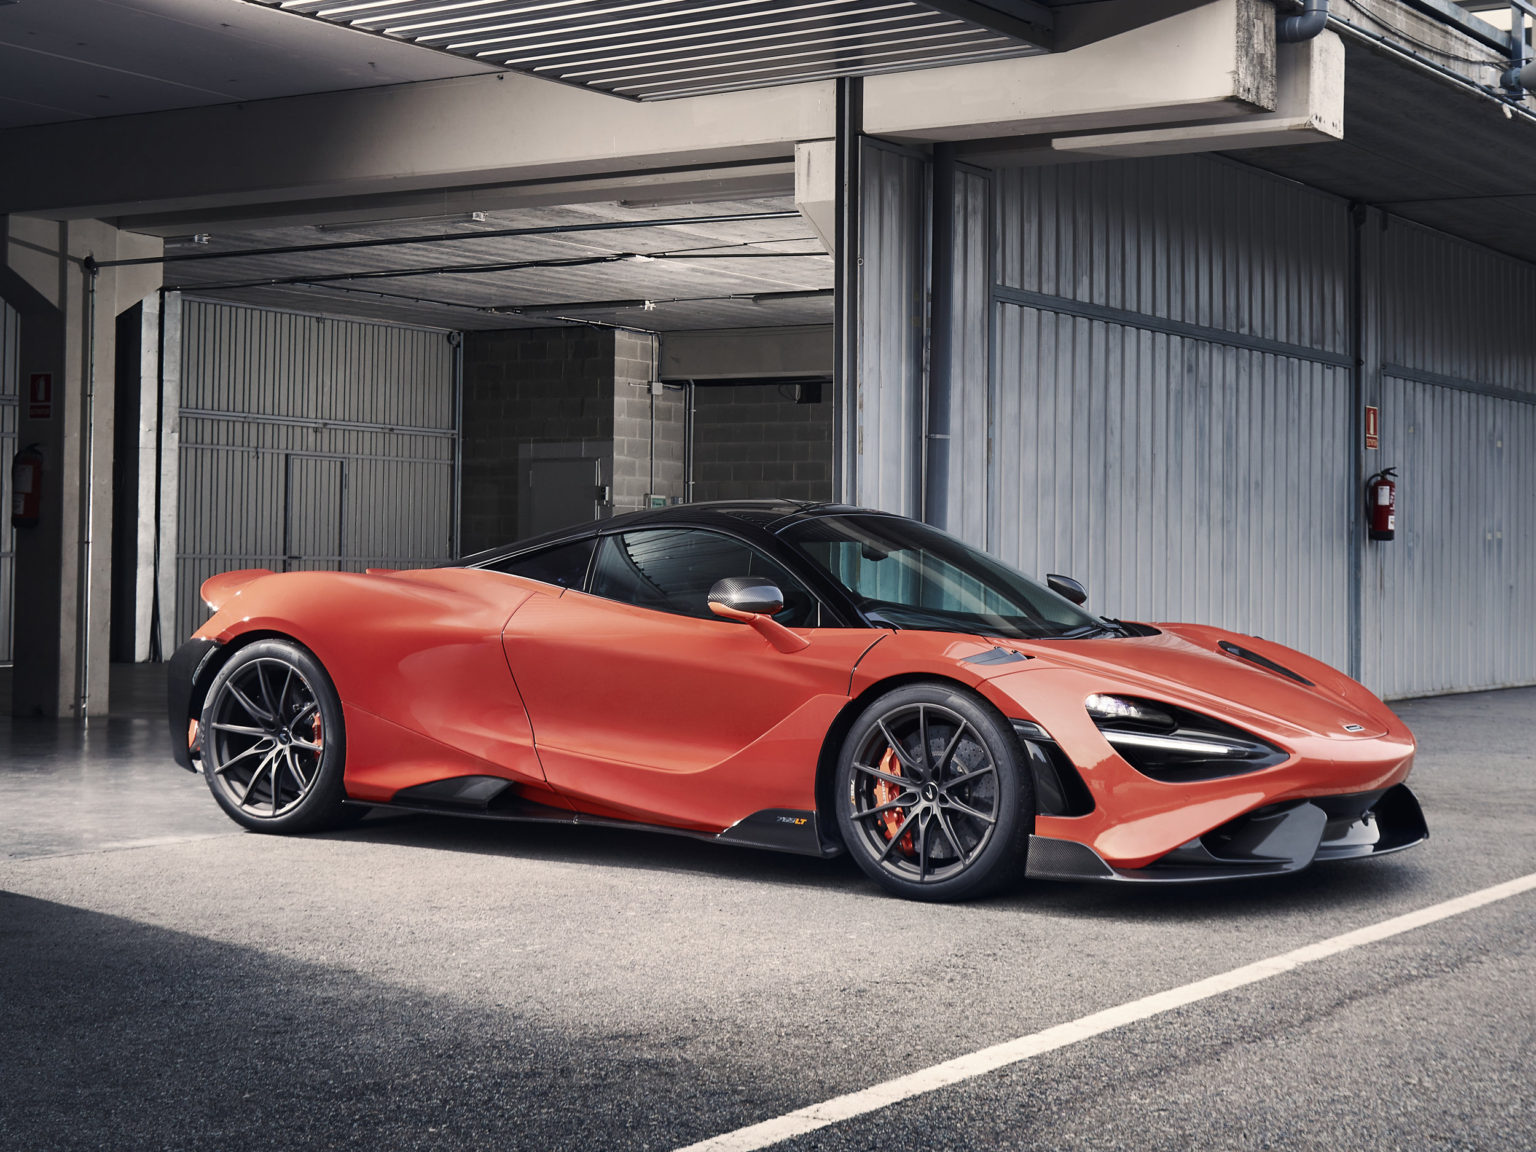 McLaren has made a new model that's lighter than the 720S.